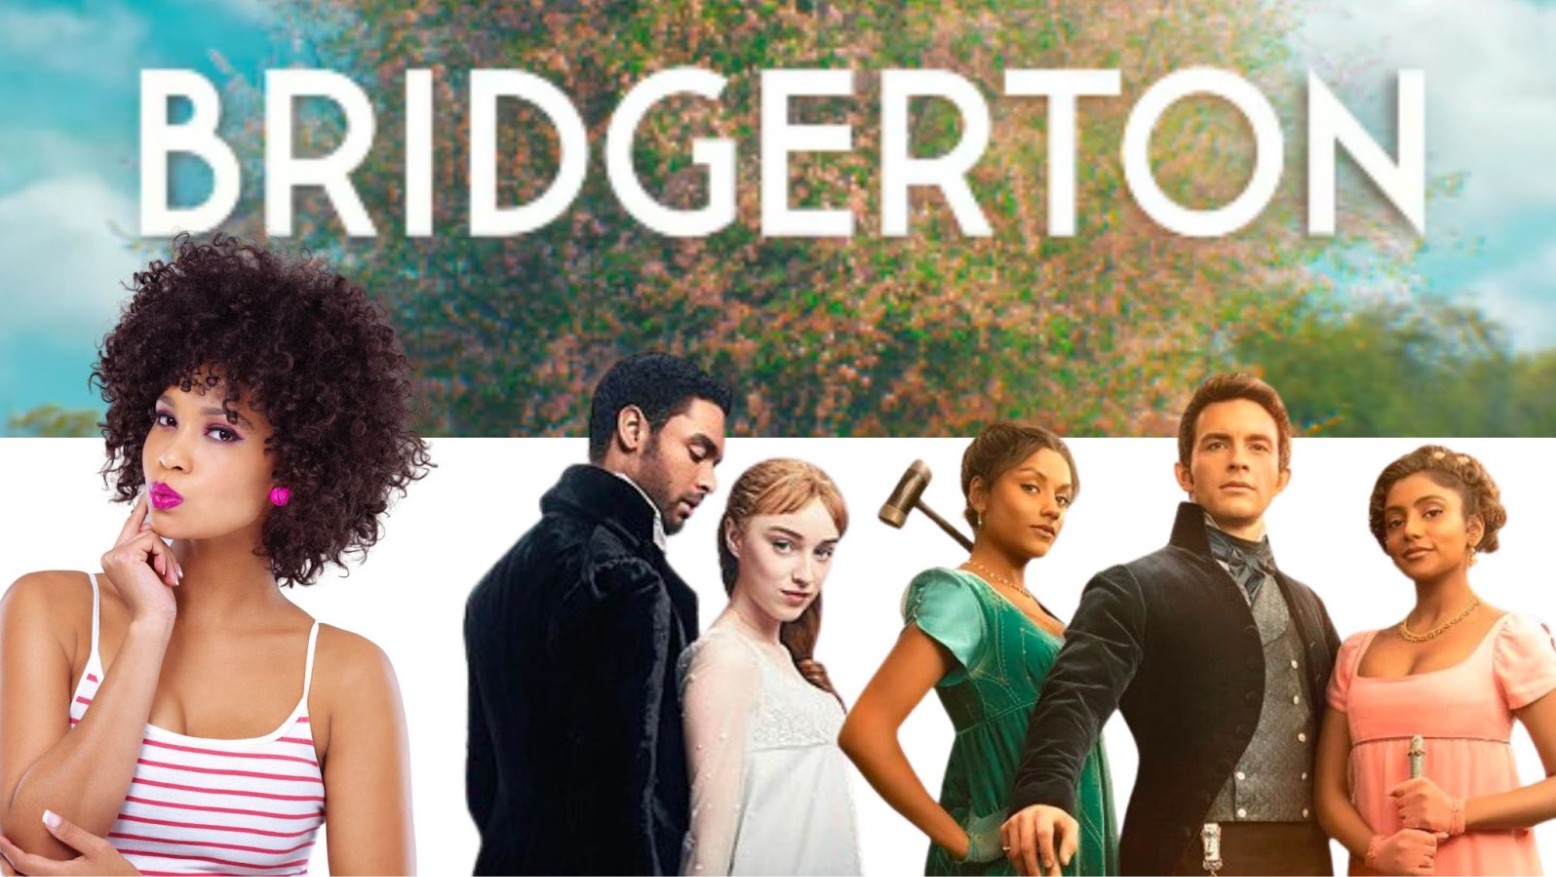 Bridgerton is the background image, overlaid by key characters in the series. An African American woman sits atop the photo saying “hmmm.”